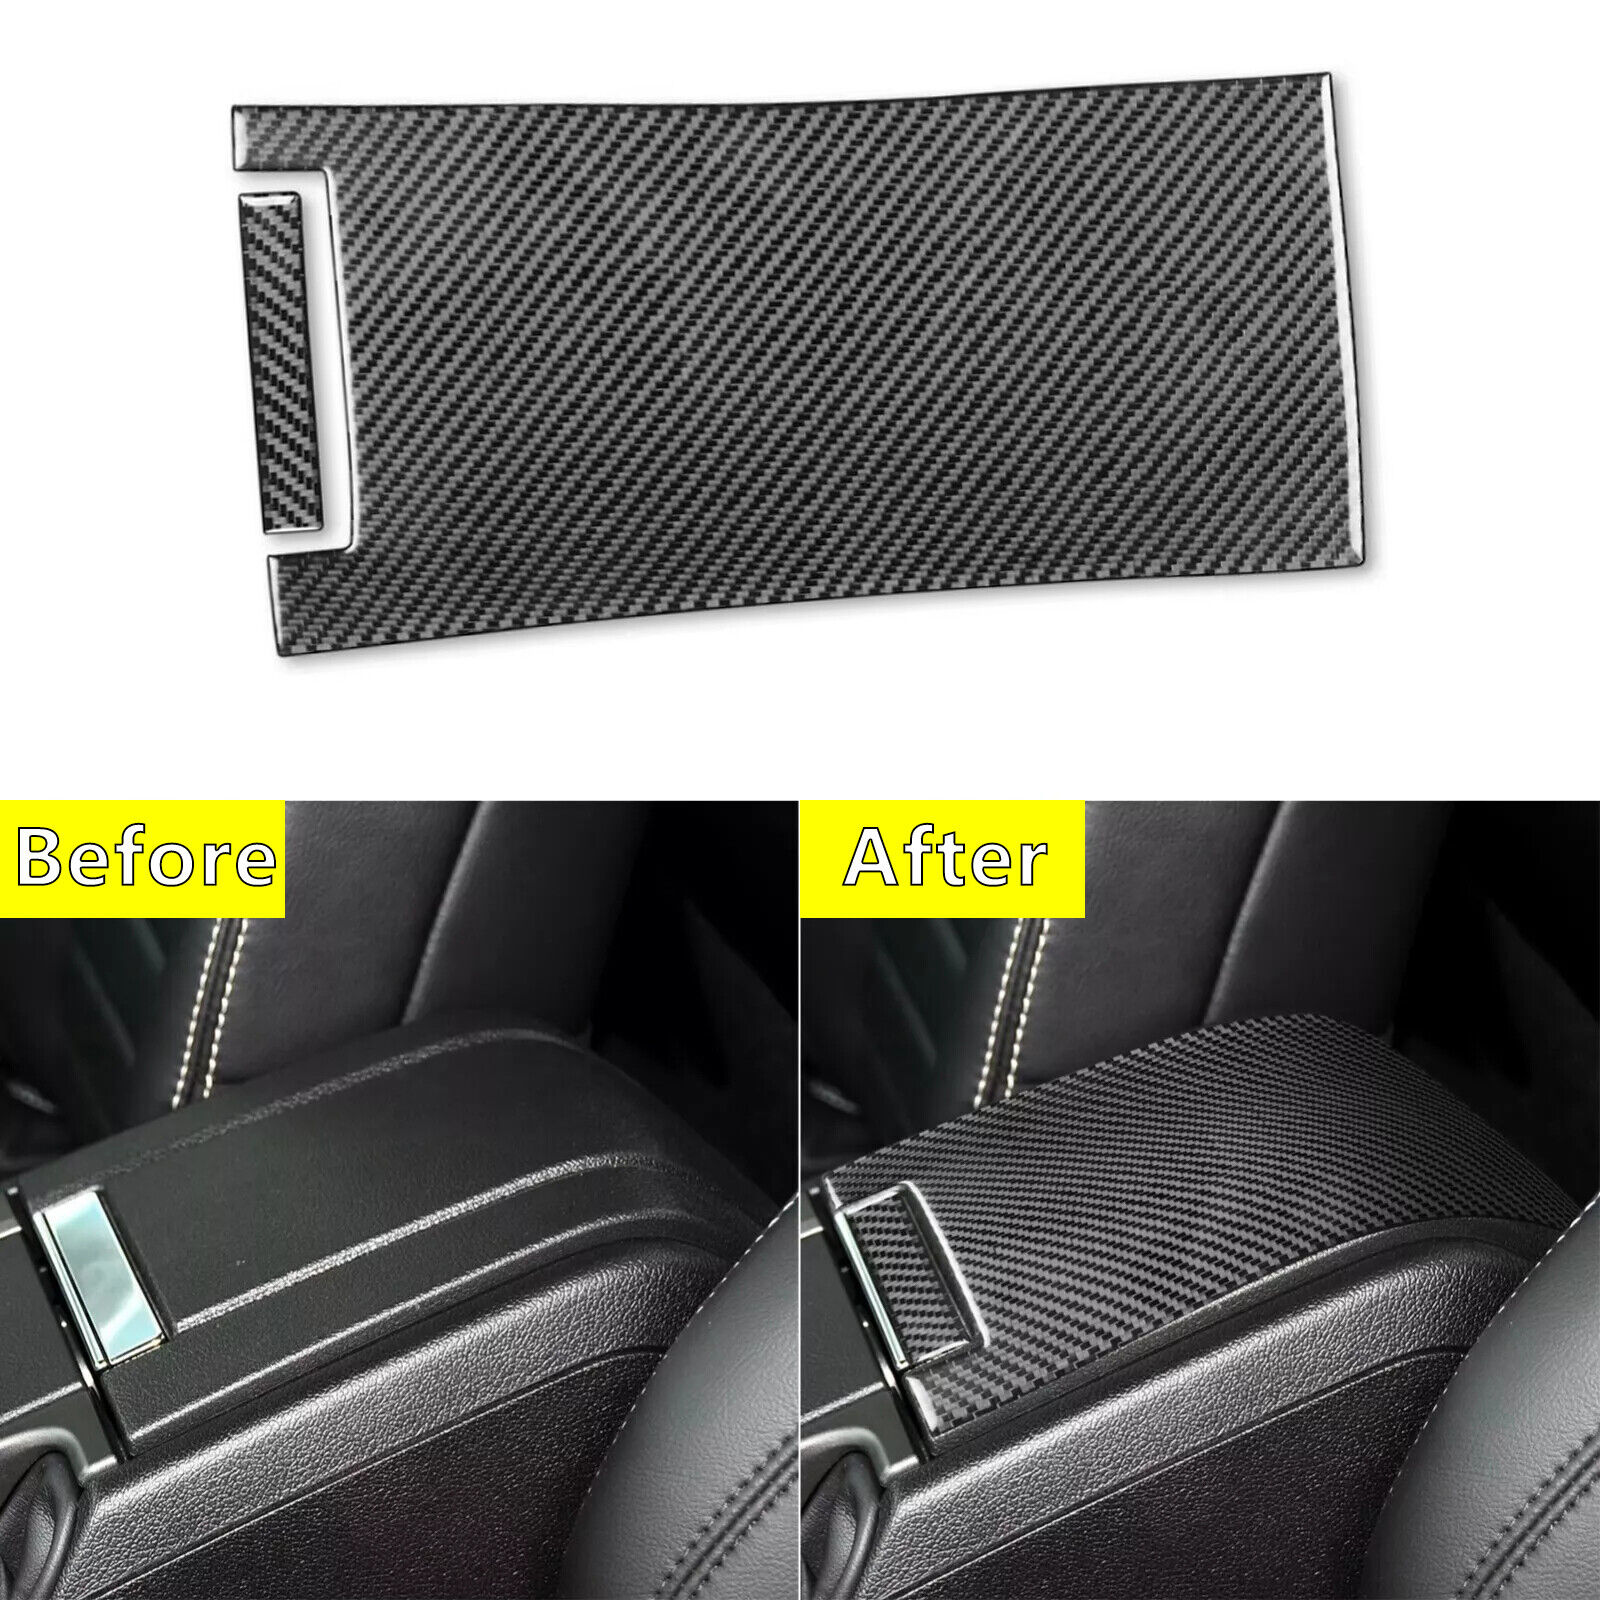 2Pcs Real Carbon Fiber Decal Center Console Armrest Box Cover For Mustang 09-14